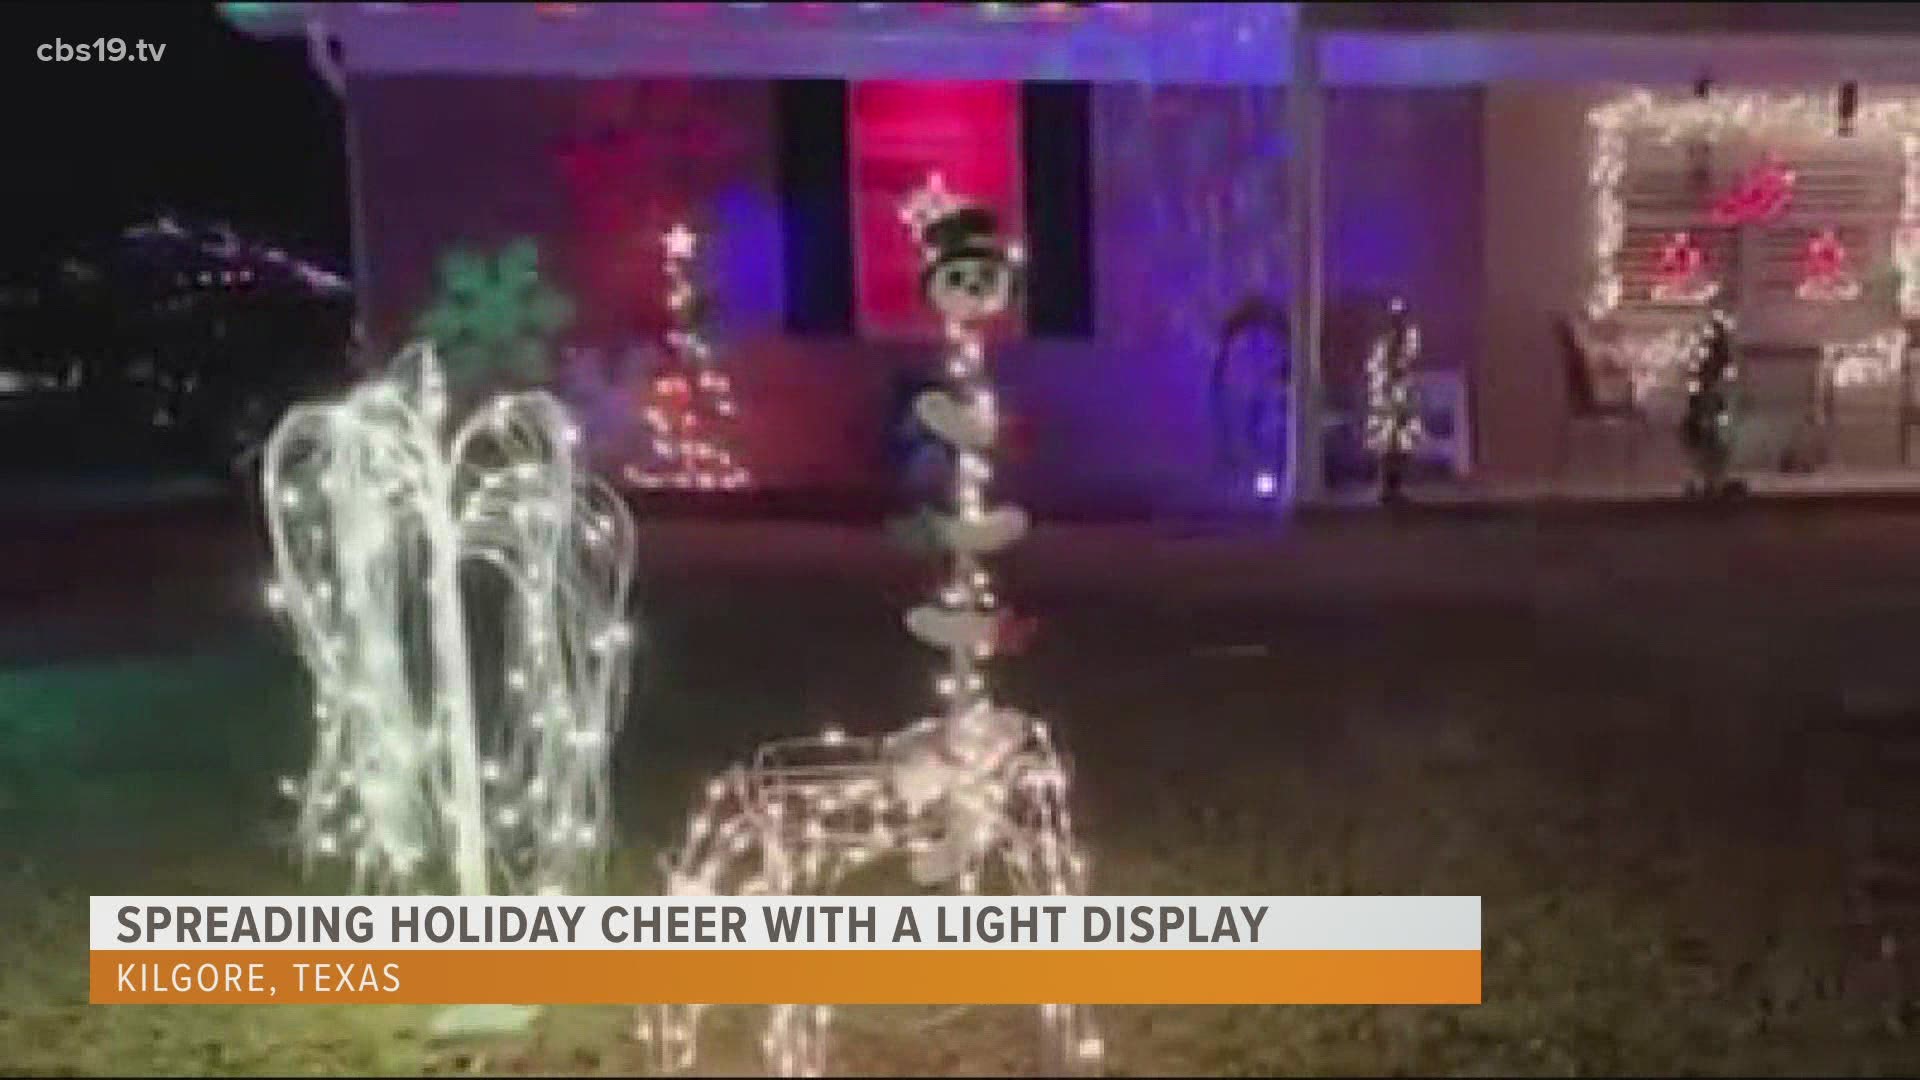 Kilgore resident spreading holiday cheer with a light display